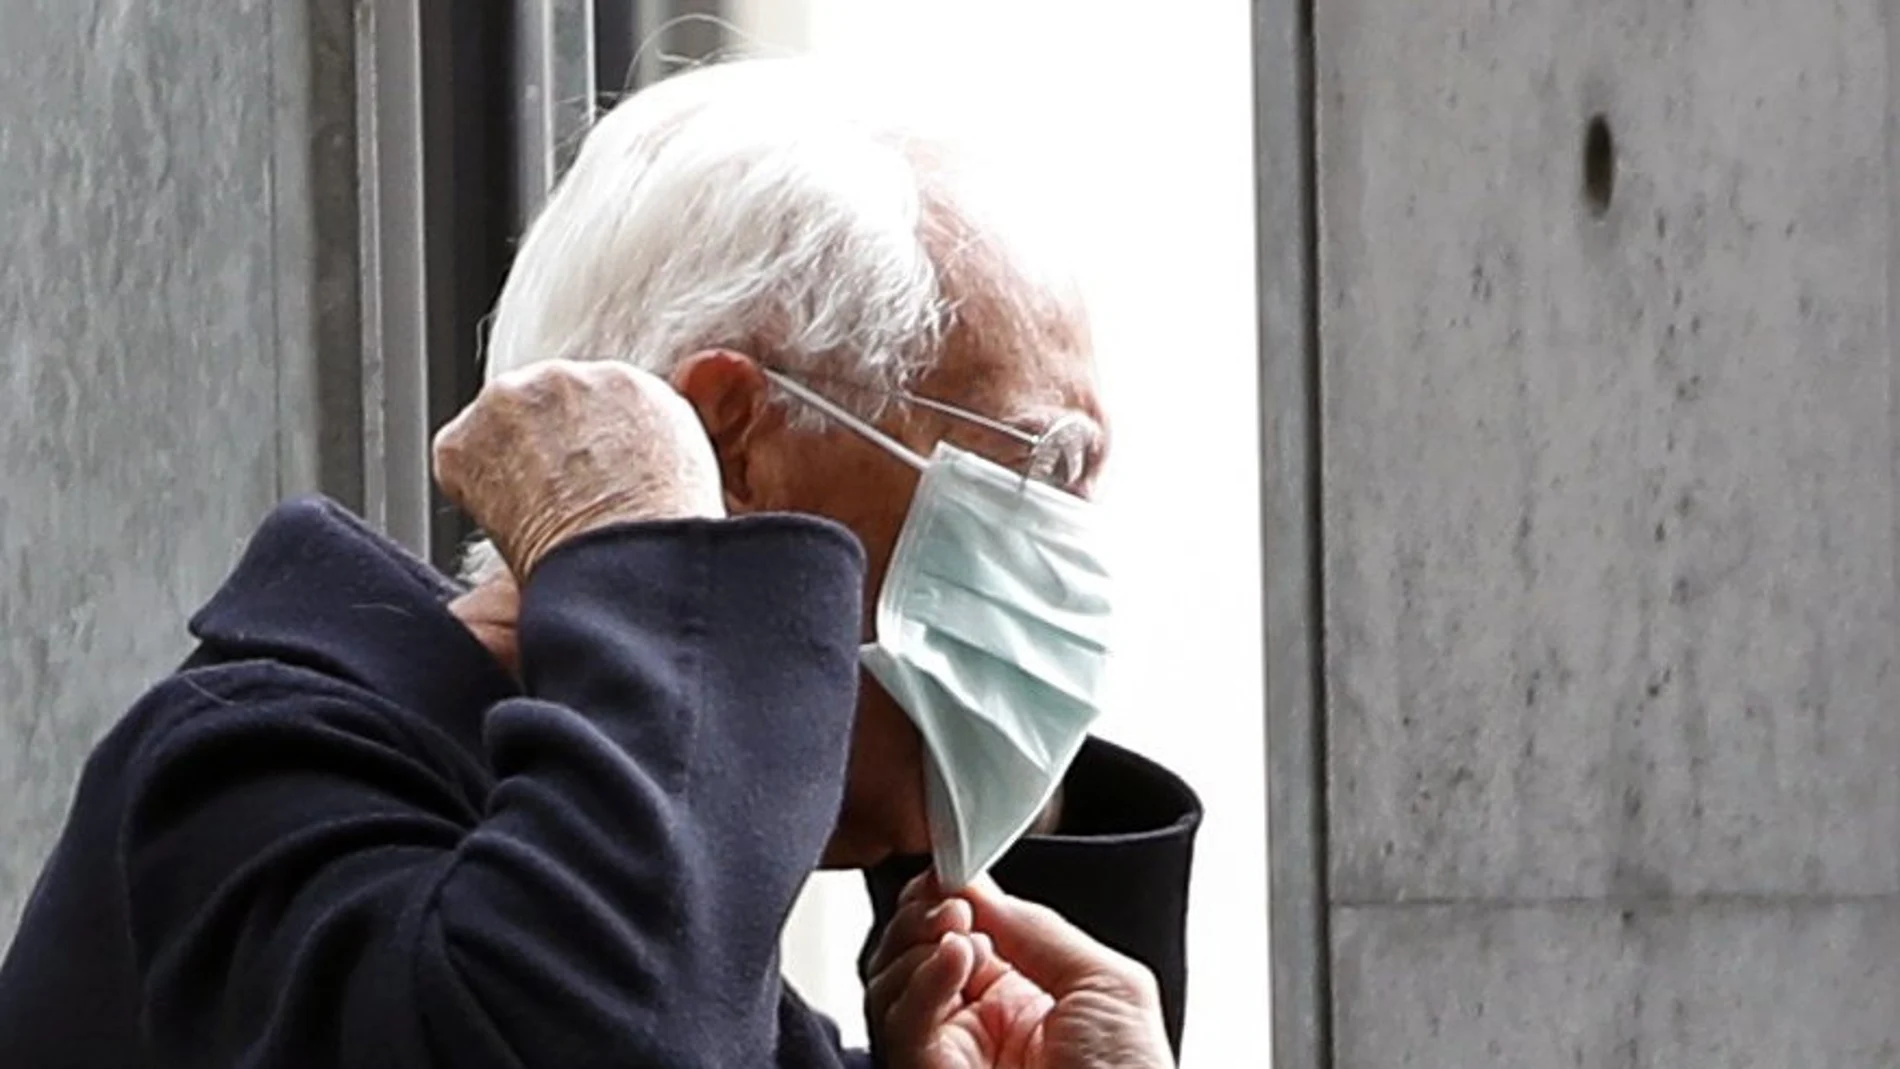 Designer Giorgio Armani puts on a face mask as he arrives at the venue of his Autumn/Winter 2020 collection fashion show during Milan Fashion Week in Milan